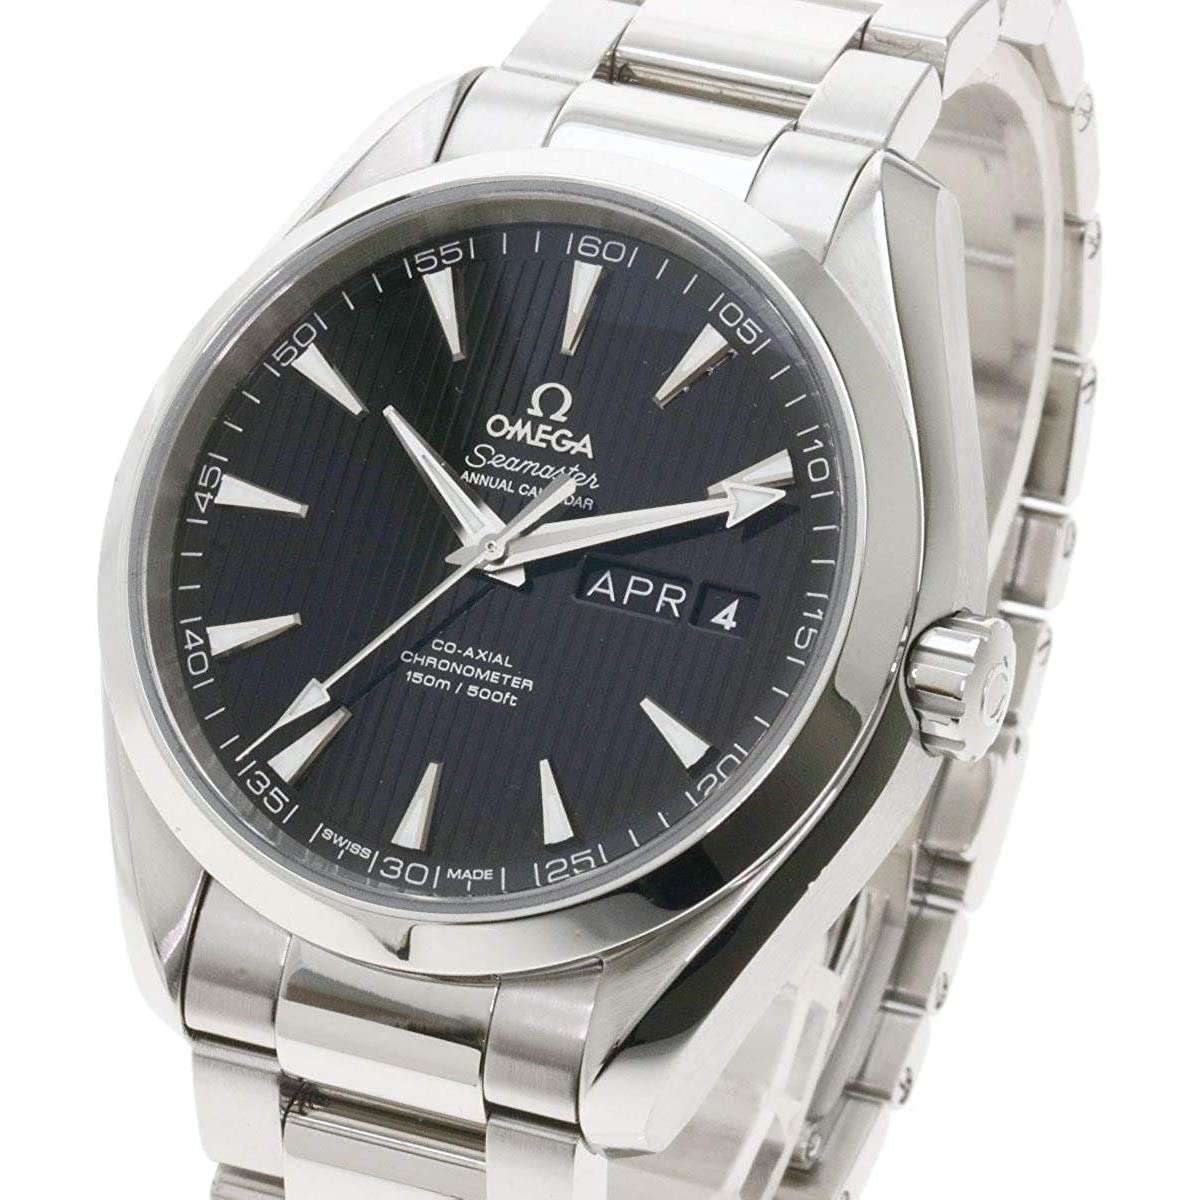 ROOK JAPAN:OMEGA SEAMASTER ANNUAL CALENDAR CO-AXIAL CHRONOMETER 43 MM MEN WATCH 231.10.43.22.01.002,Luxury Watch,Omega